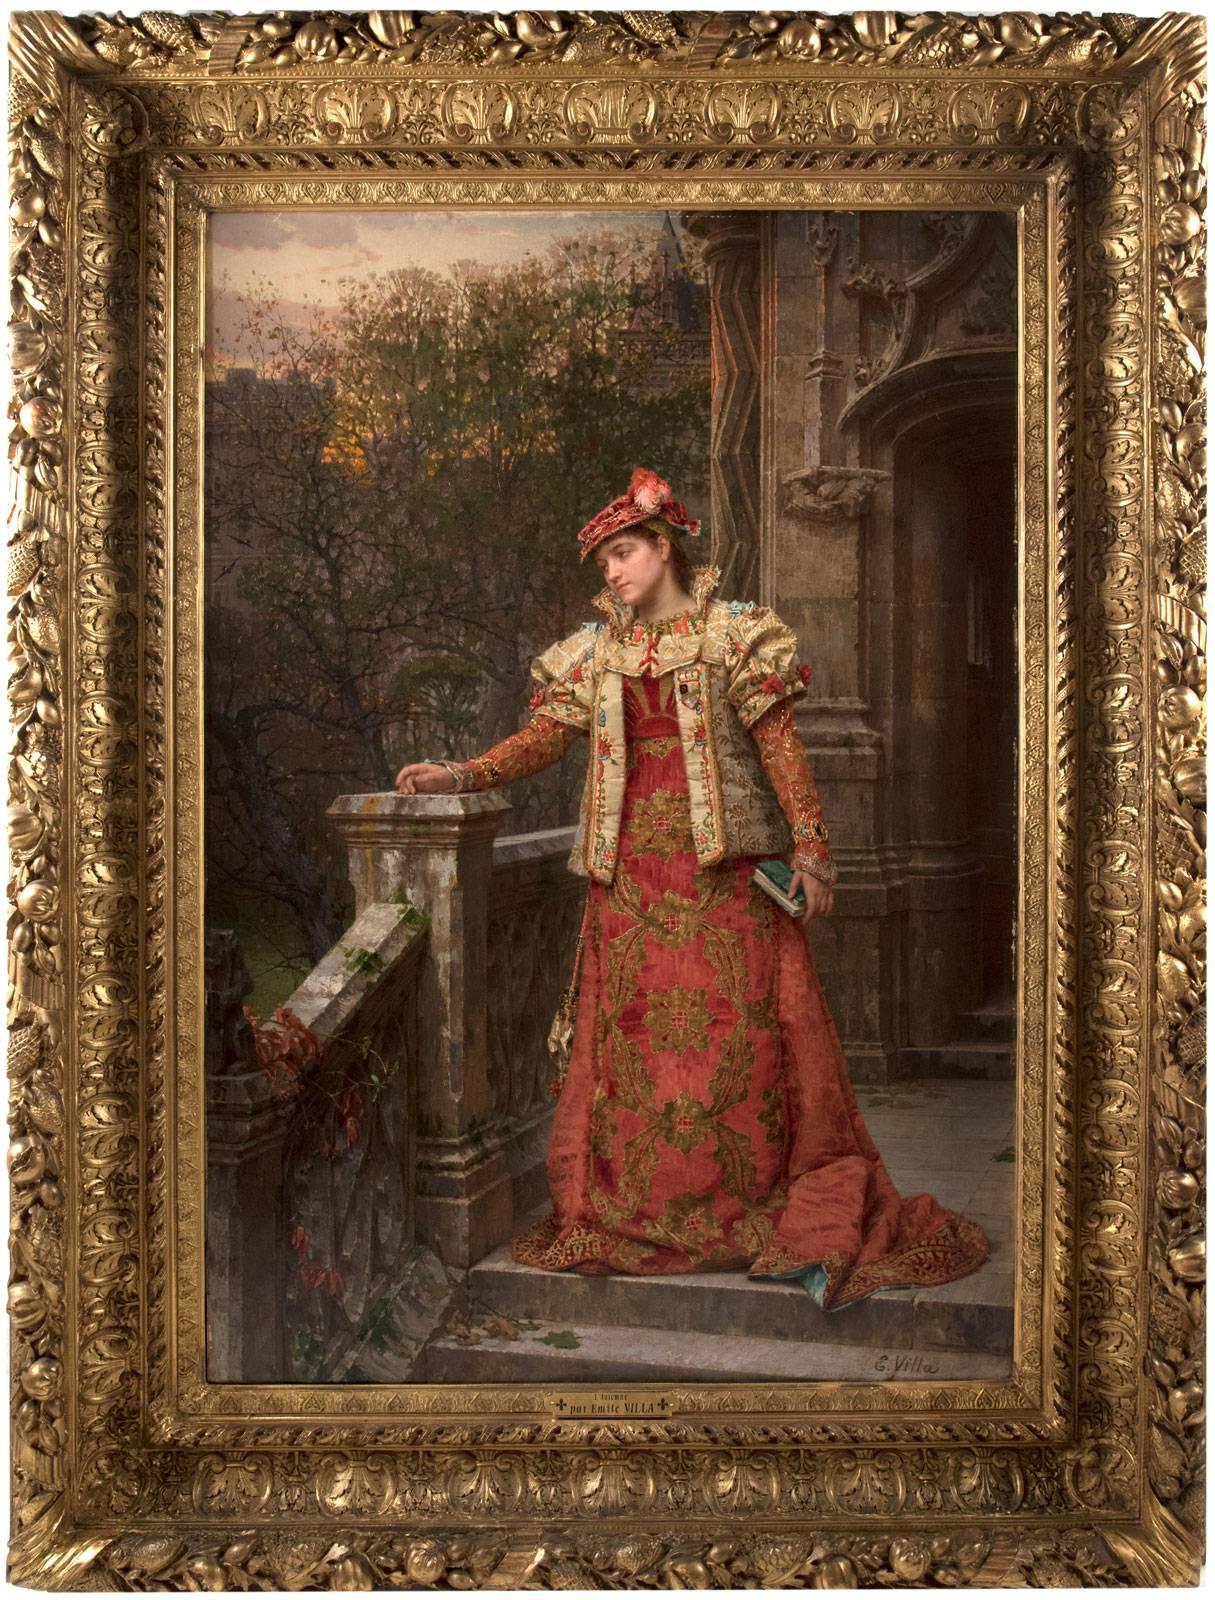 With romantic undertones, "Autumn" depicts a young woman with a pensive look standing on the steps of a neo-Gothic building. A highly detailed painting, her dress is very finely embroidered with gold thread and evokes the fashion of the